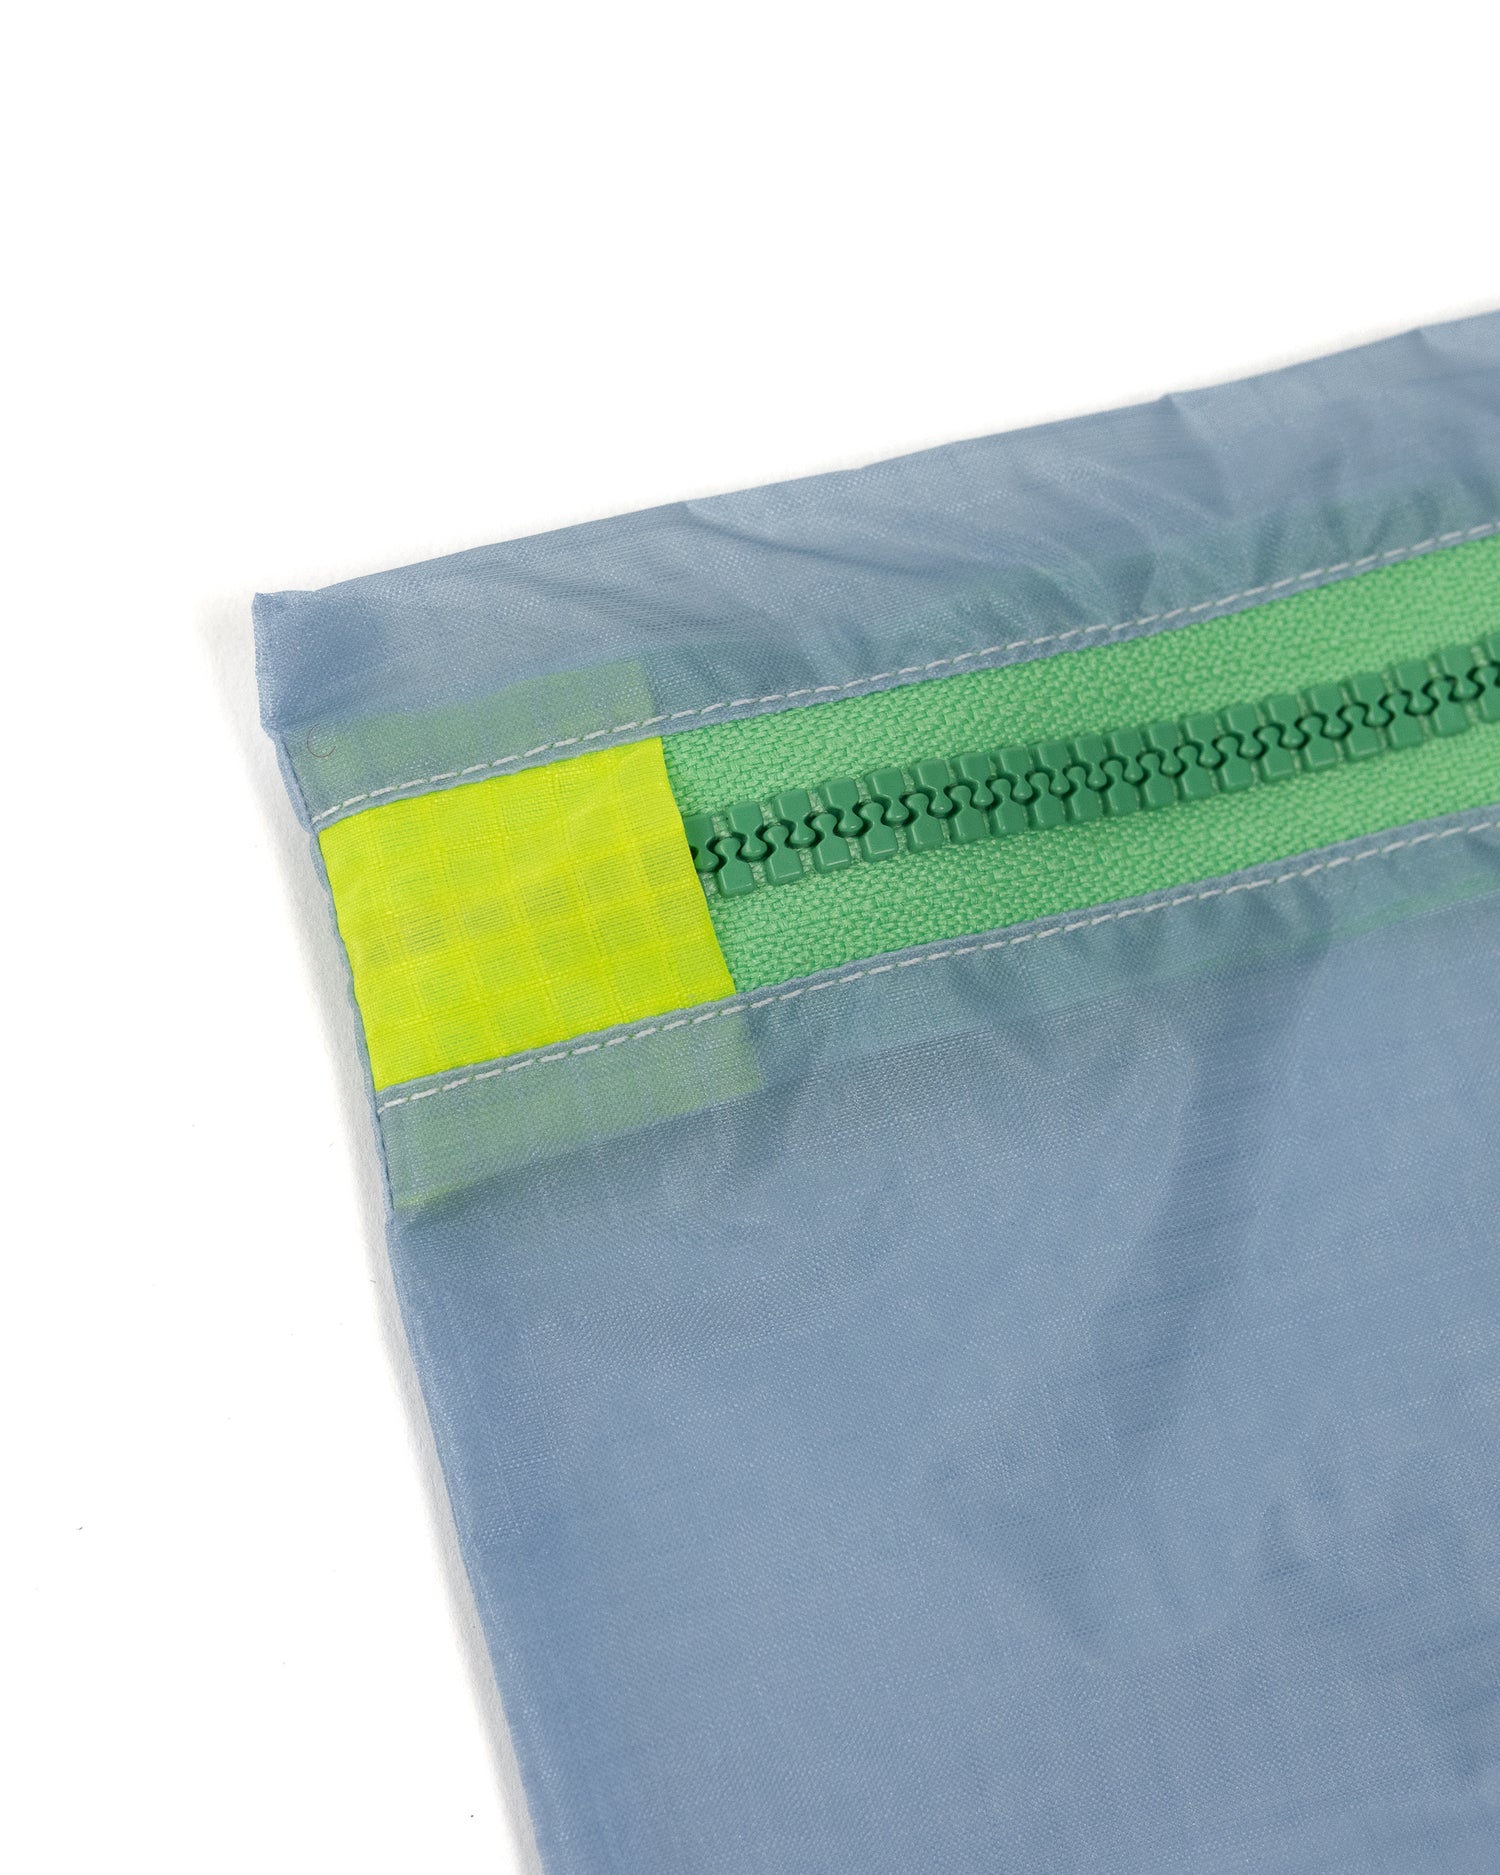 Grey and light green square zipper pouch made from upcycled ripstop nylon